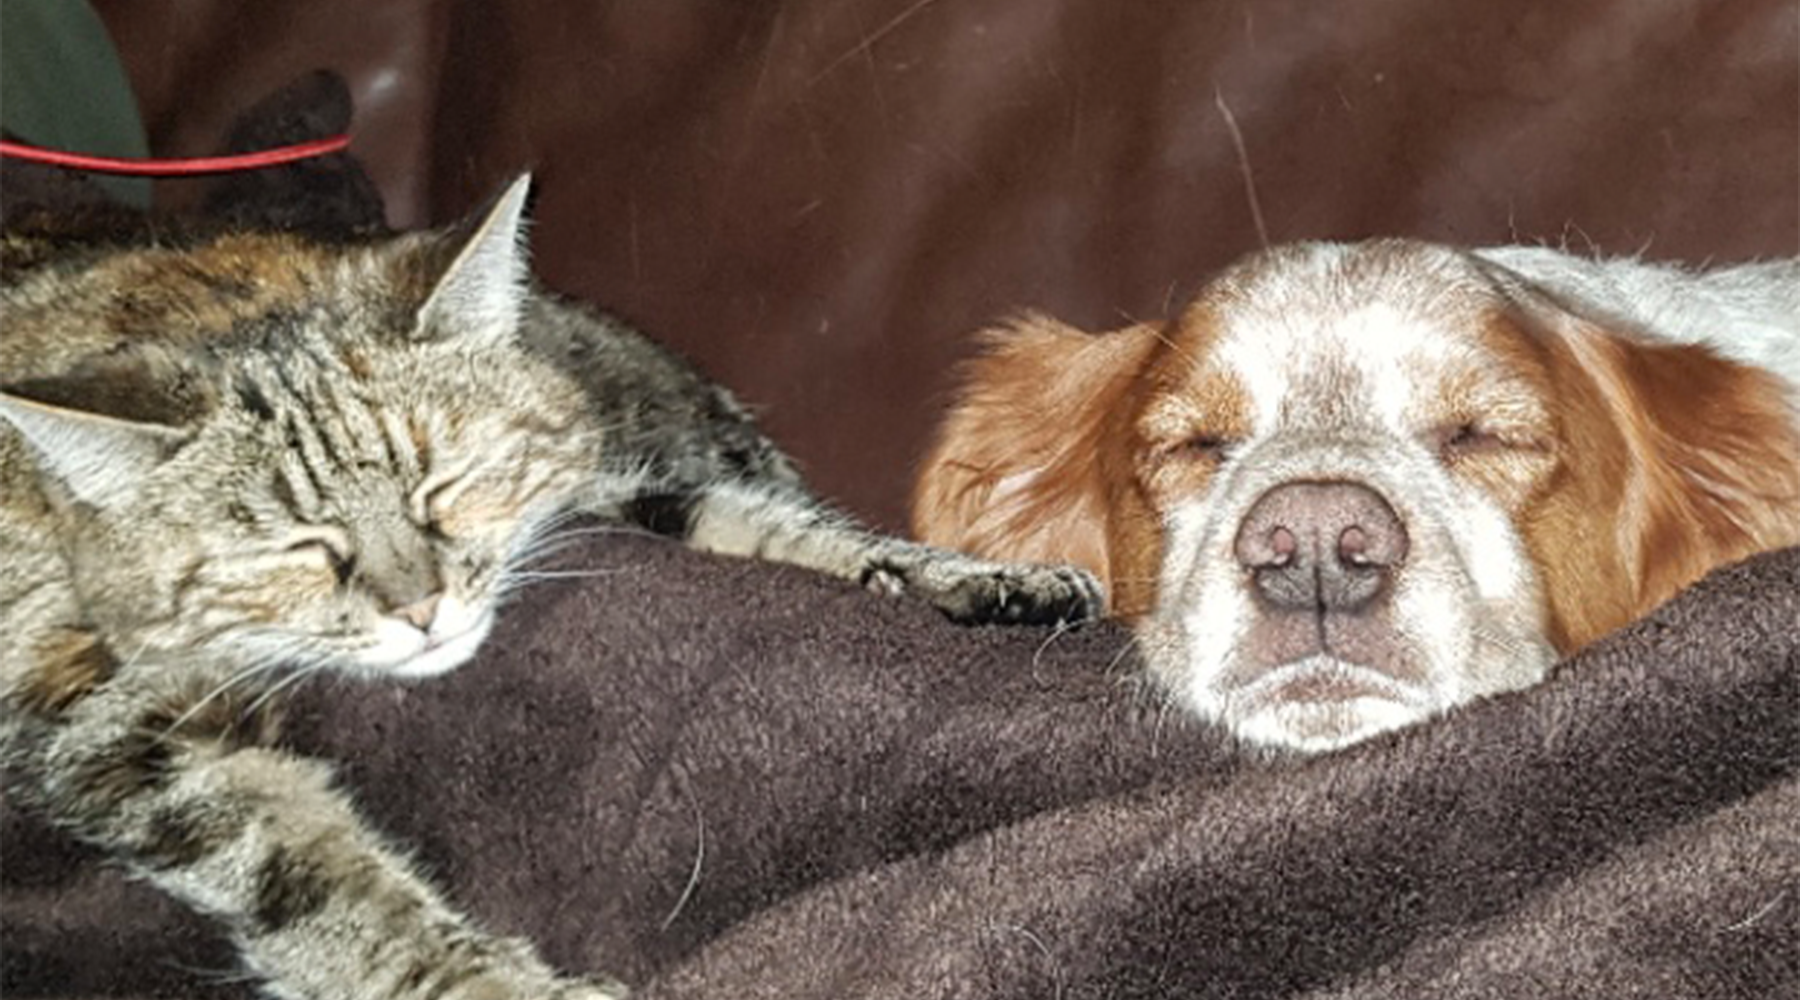 Cat and dog asleep on a blanket